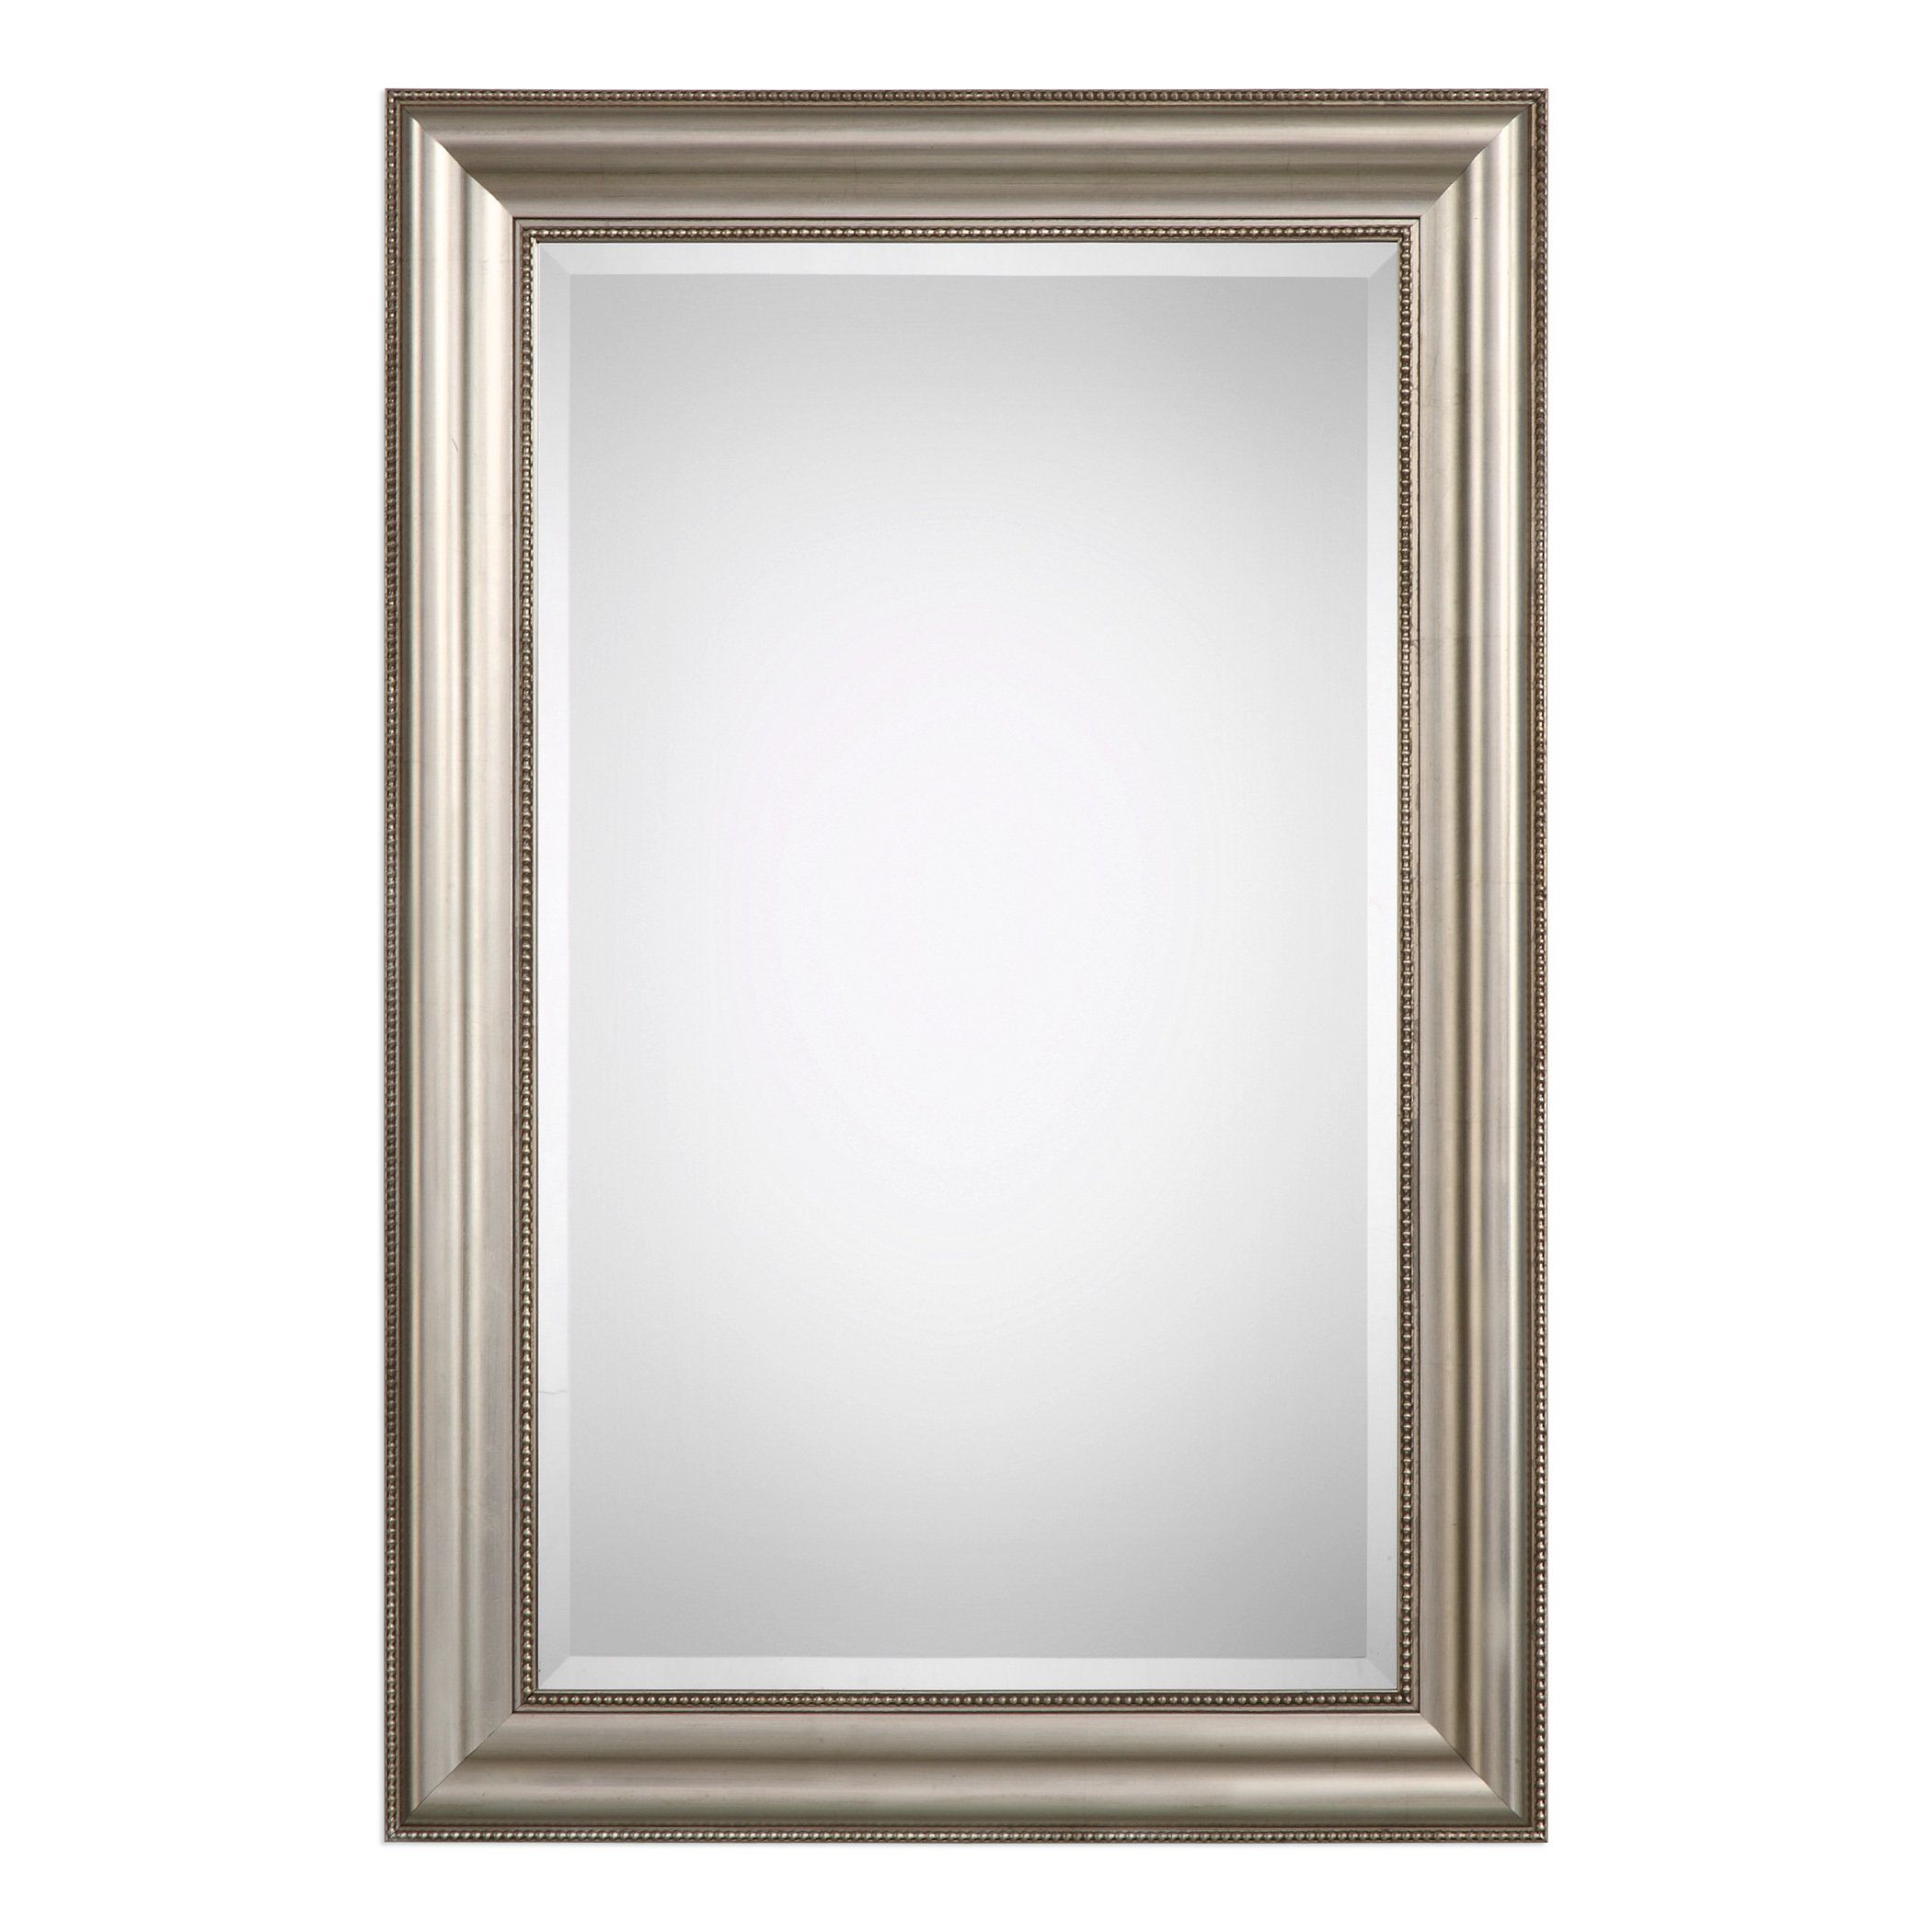 Farmhouse Mirrors | Birch Lane Inside Traditional Square Glass Wall Mirrors (View 14 of 20)